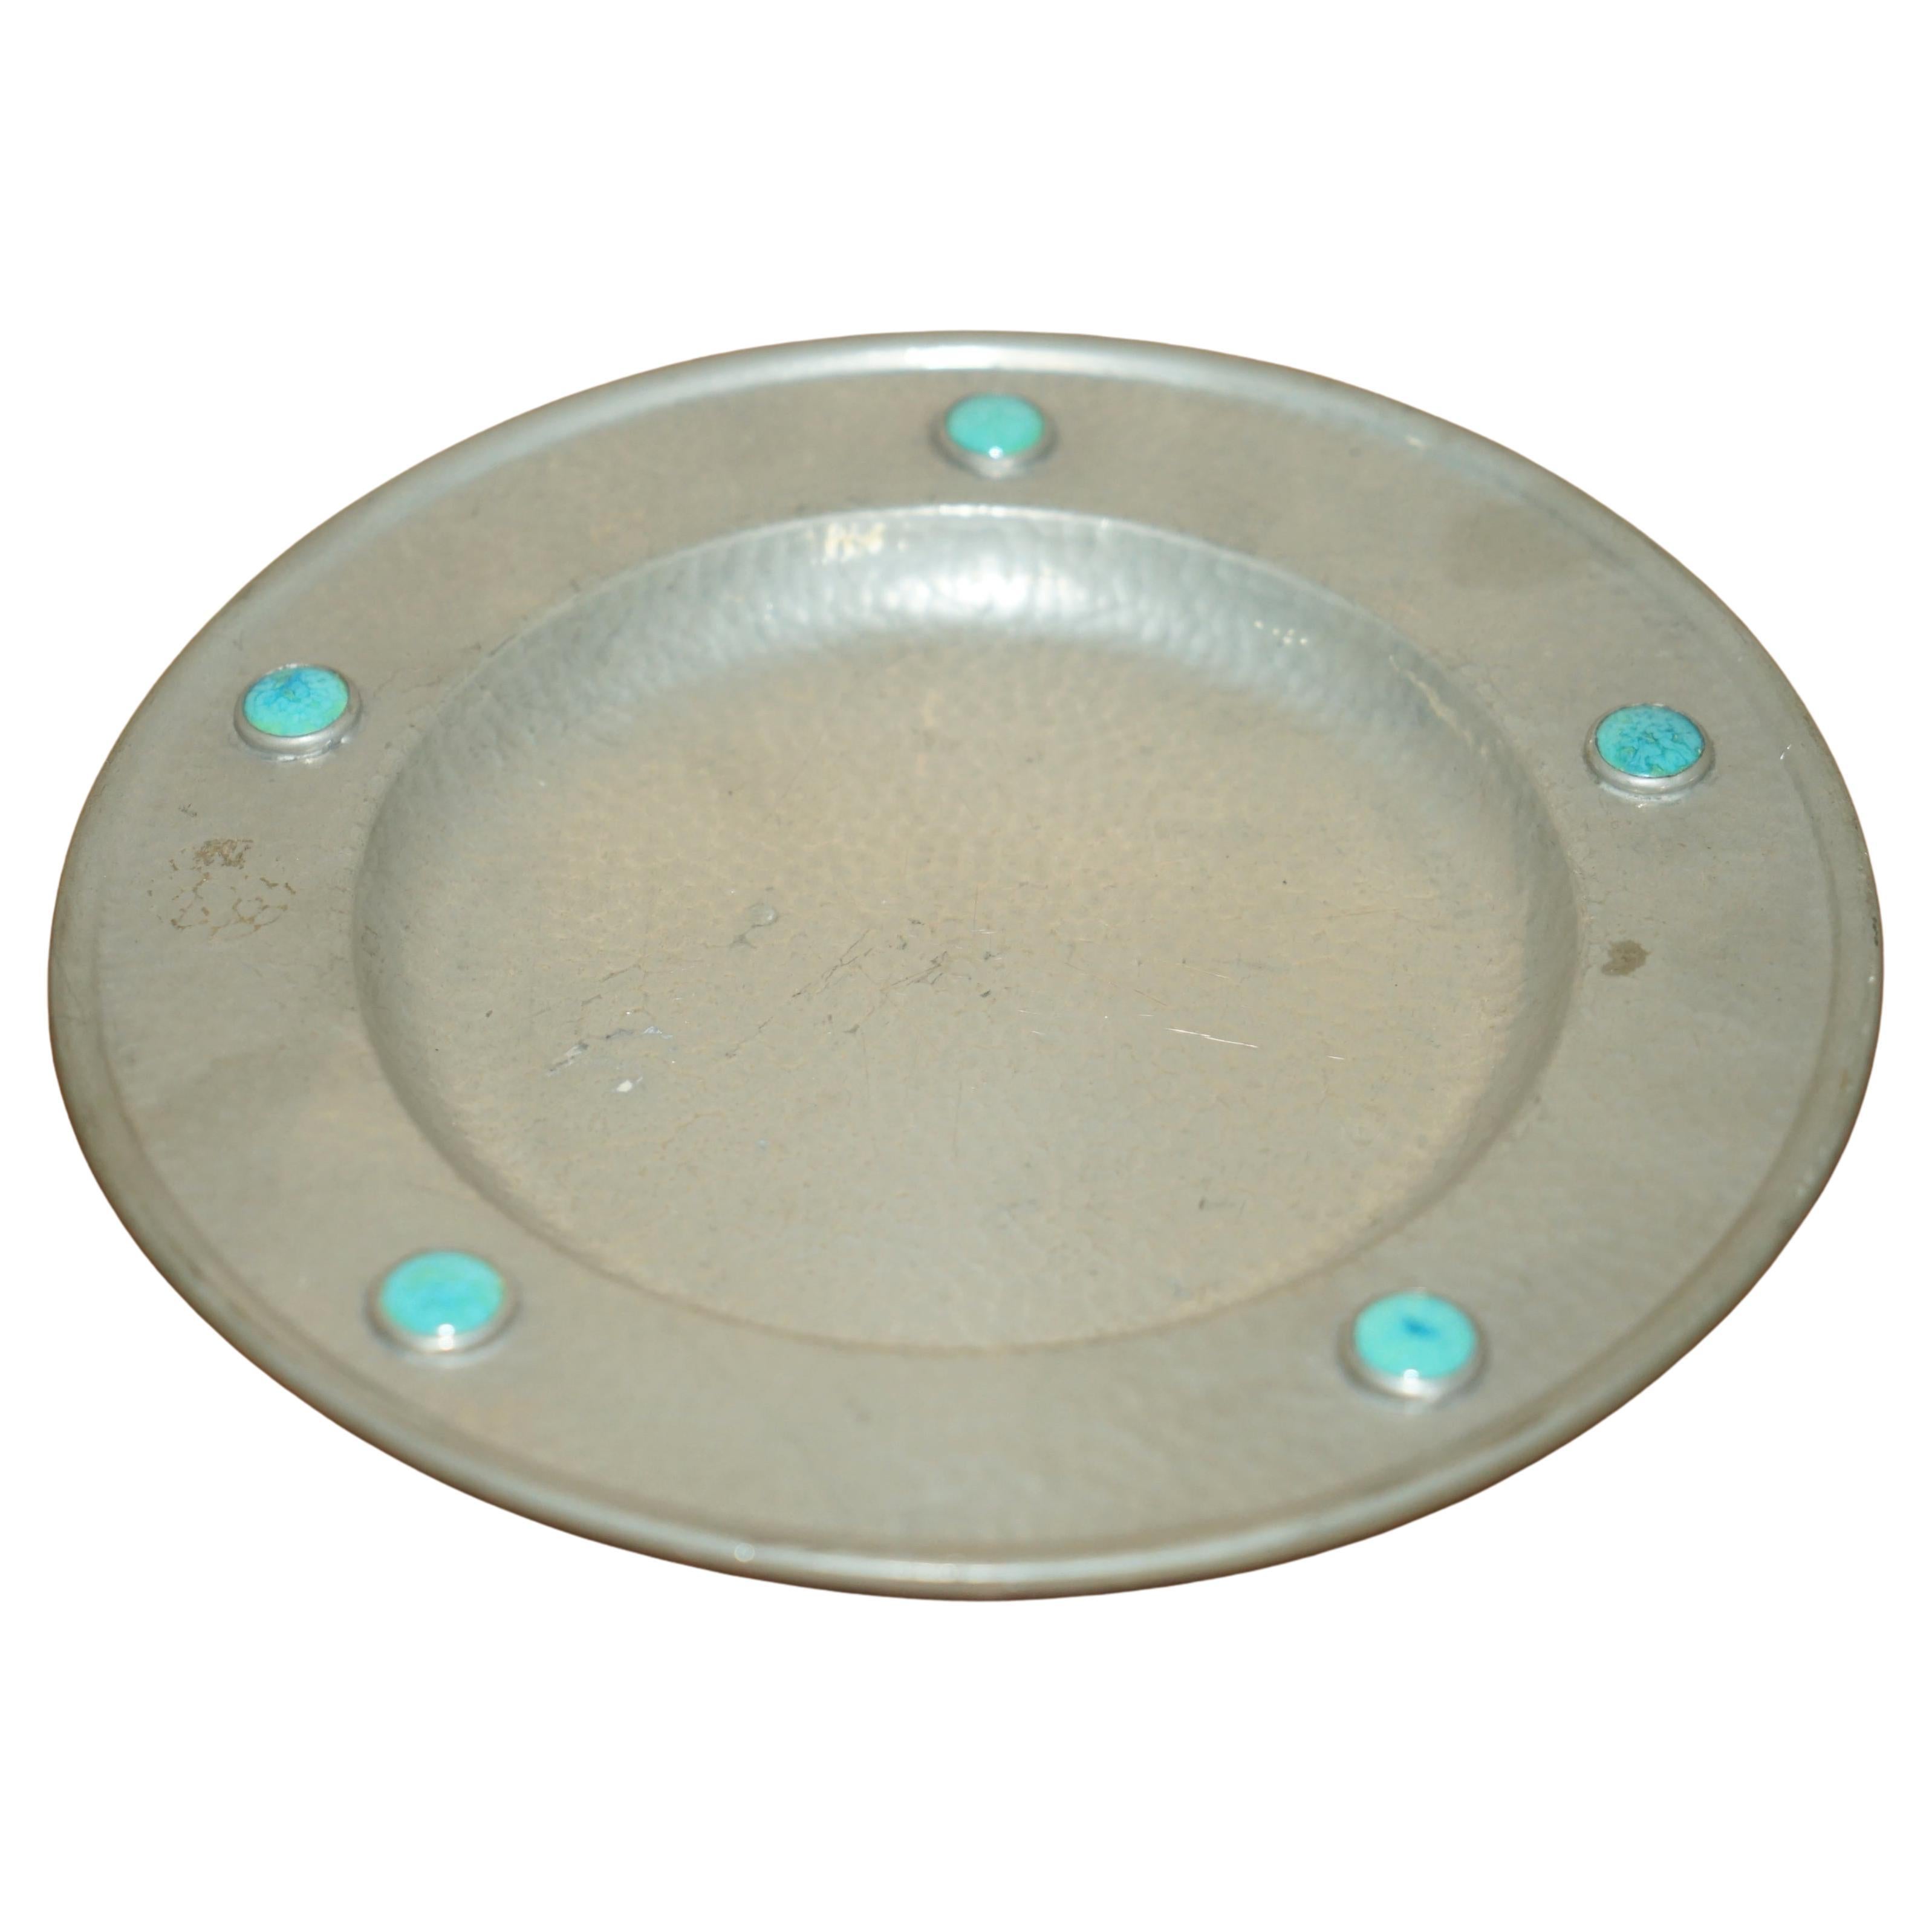 LOVELY LIBERTY'S LONDON STYLE ASHBERRY PEWTER PLATE WITH CABOCHON STONEs en vente